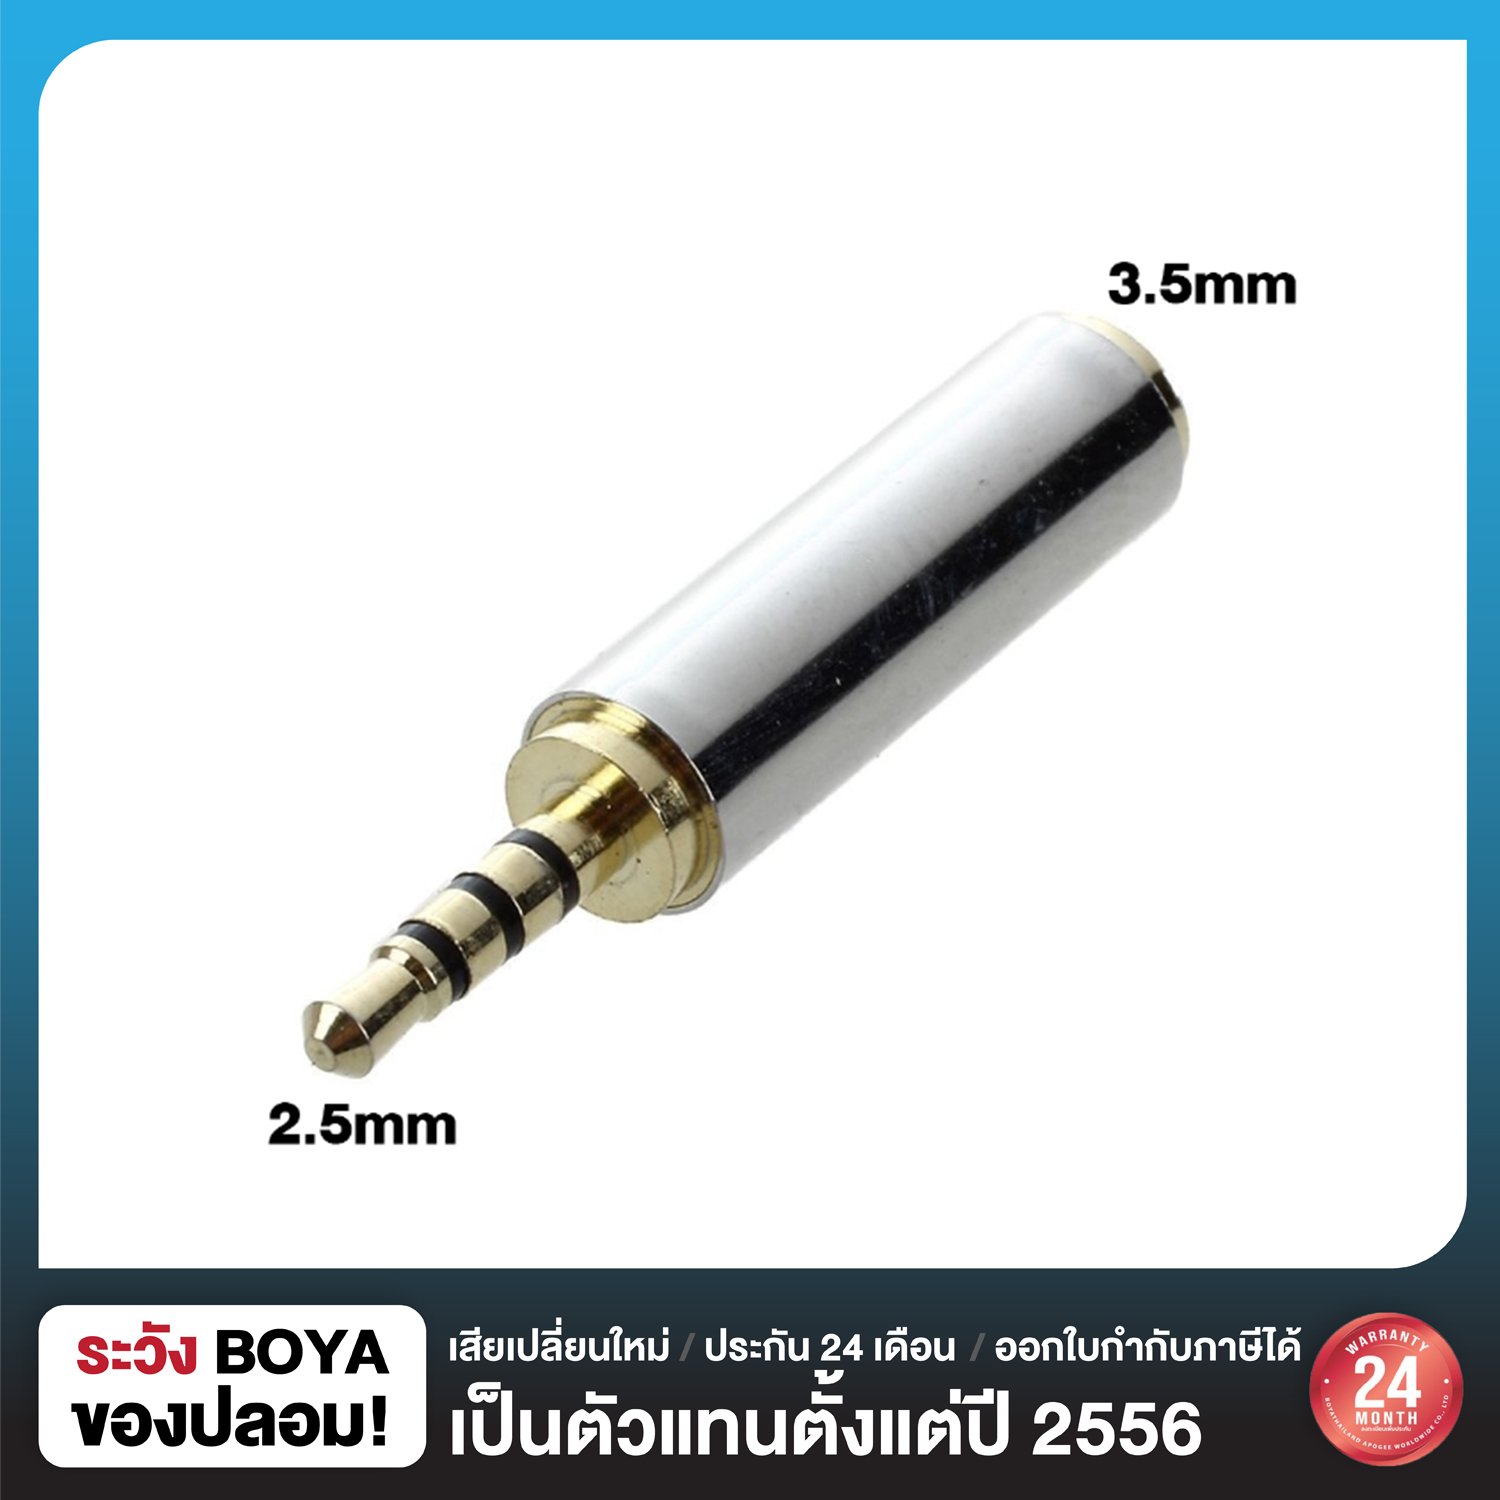 3.5mm female to 2.5mm male audio jack adapter